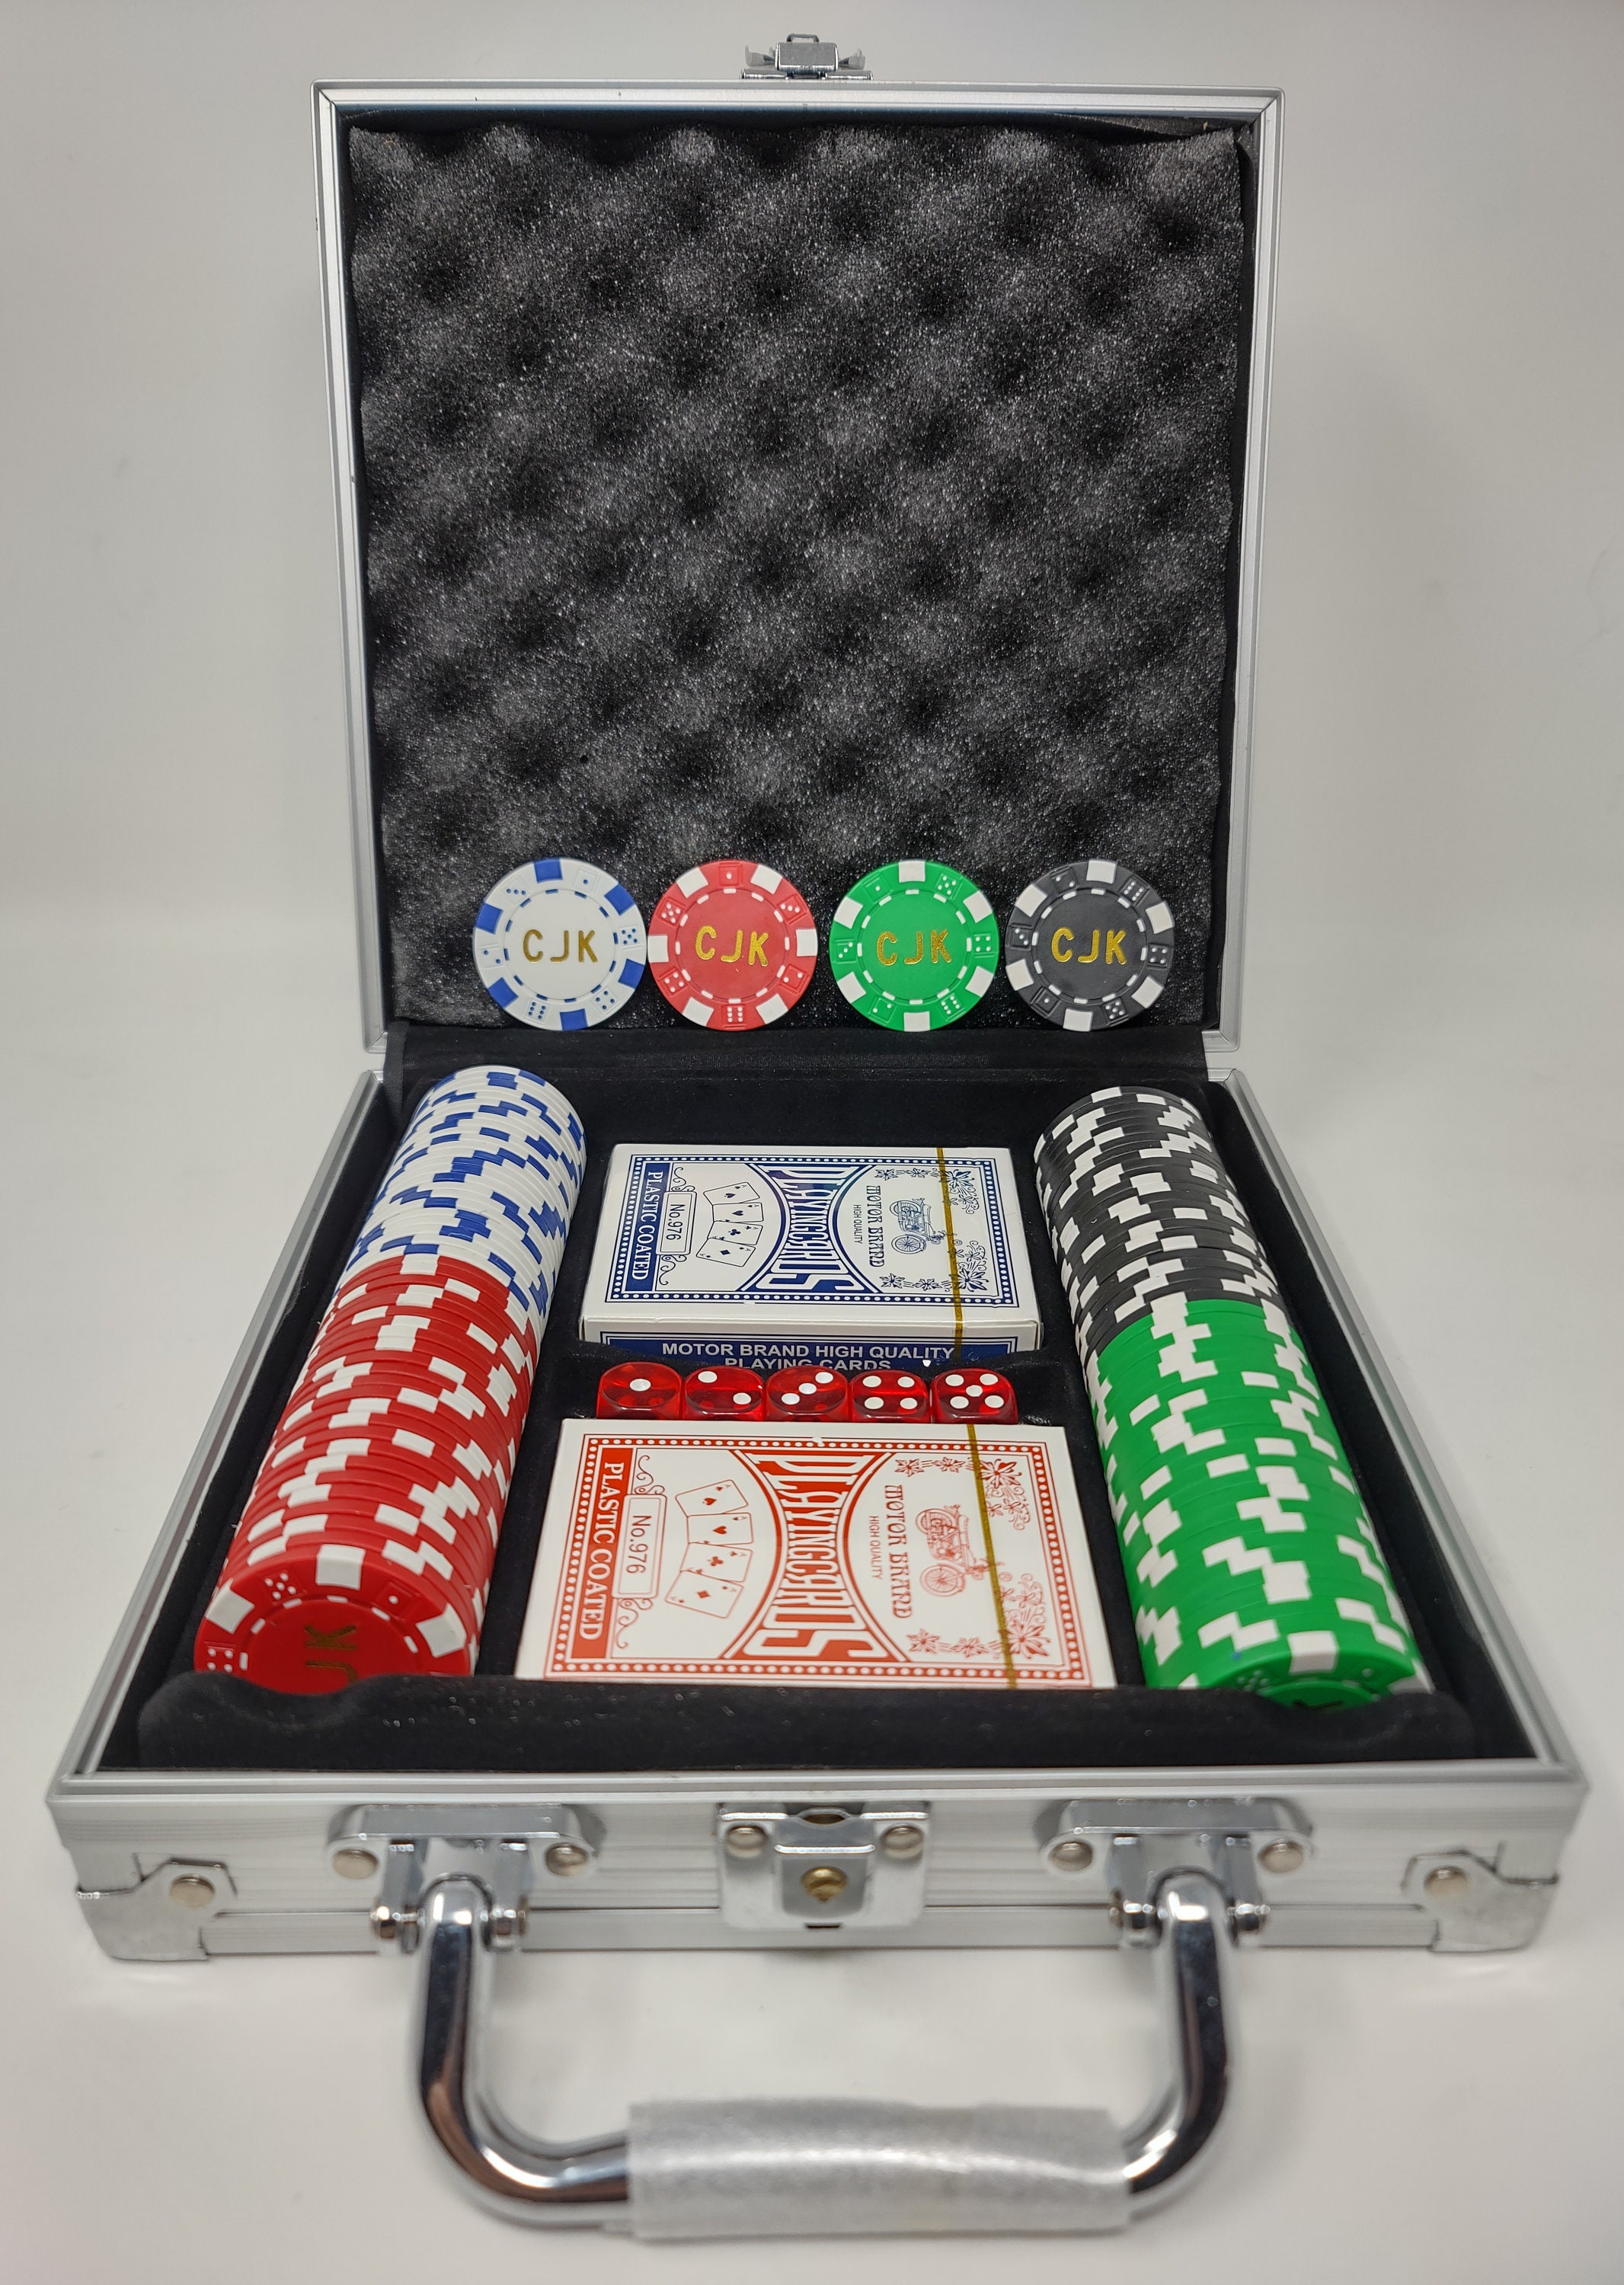 Includes Personalized 11.5 Gram Chips DA VINCI Custom Poker Chips Monogrammed with 3 Initials Printed on The Chips